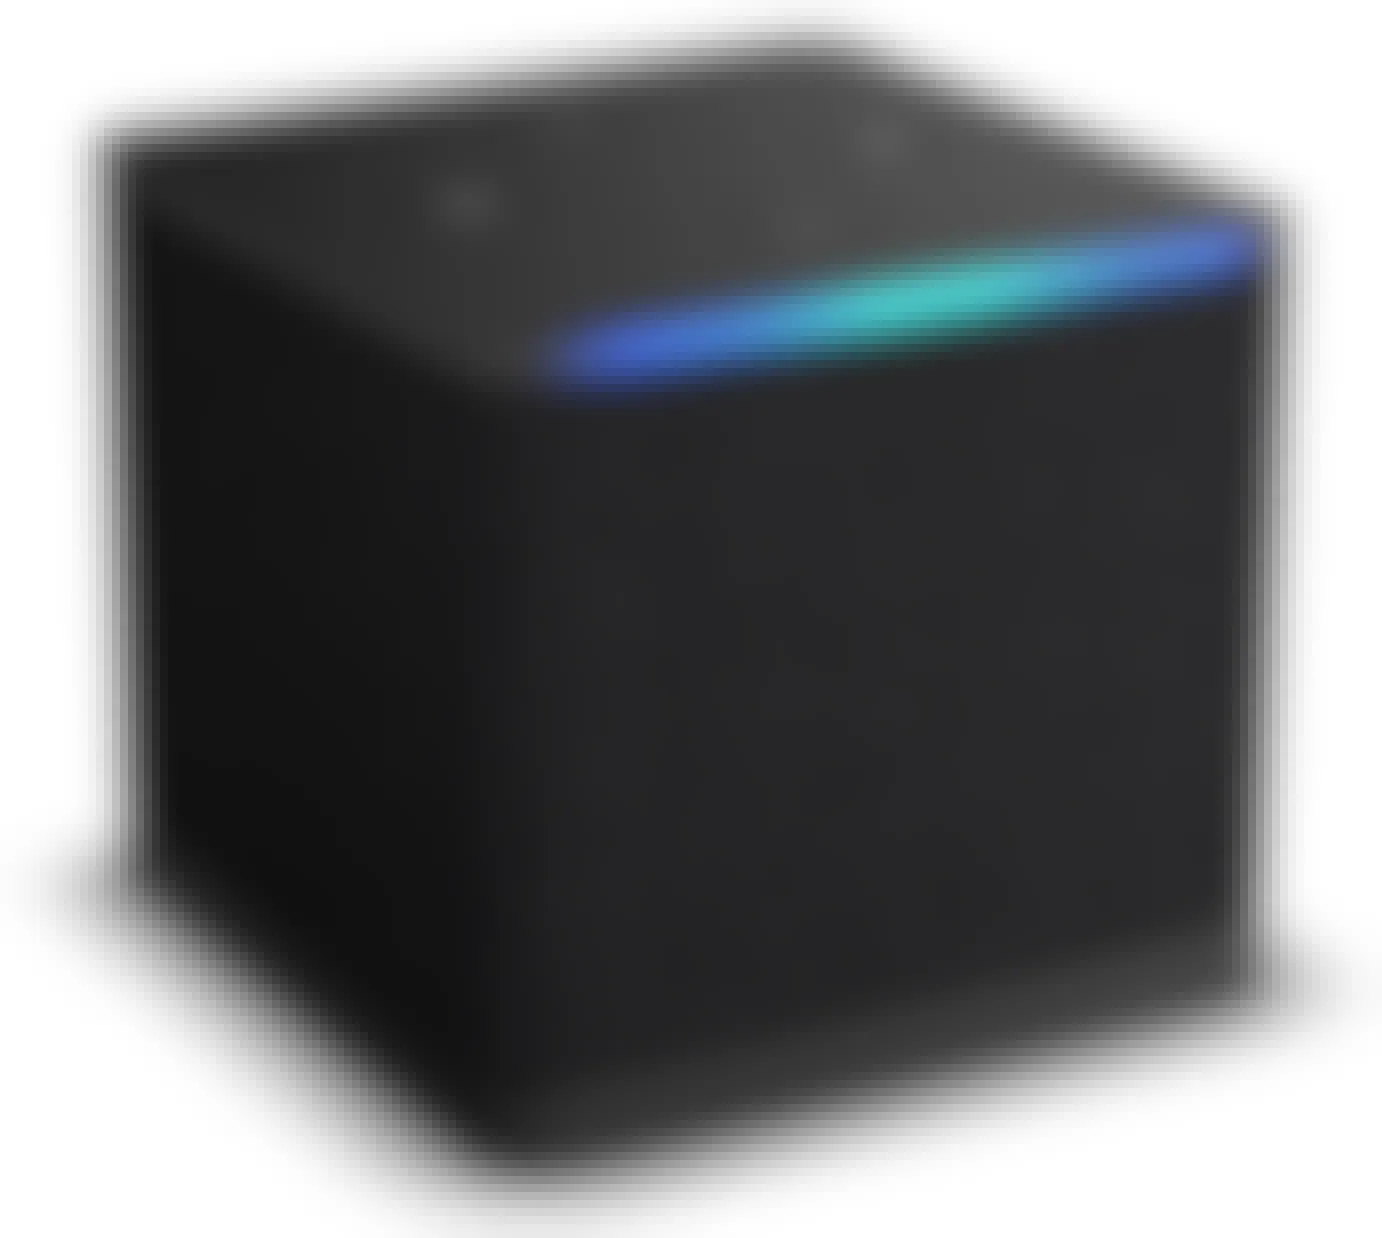 A Amazon 2022 Fire TV Cube on a white background